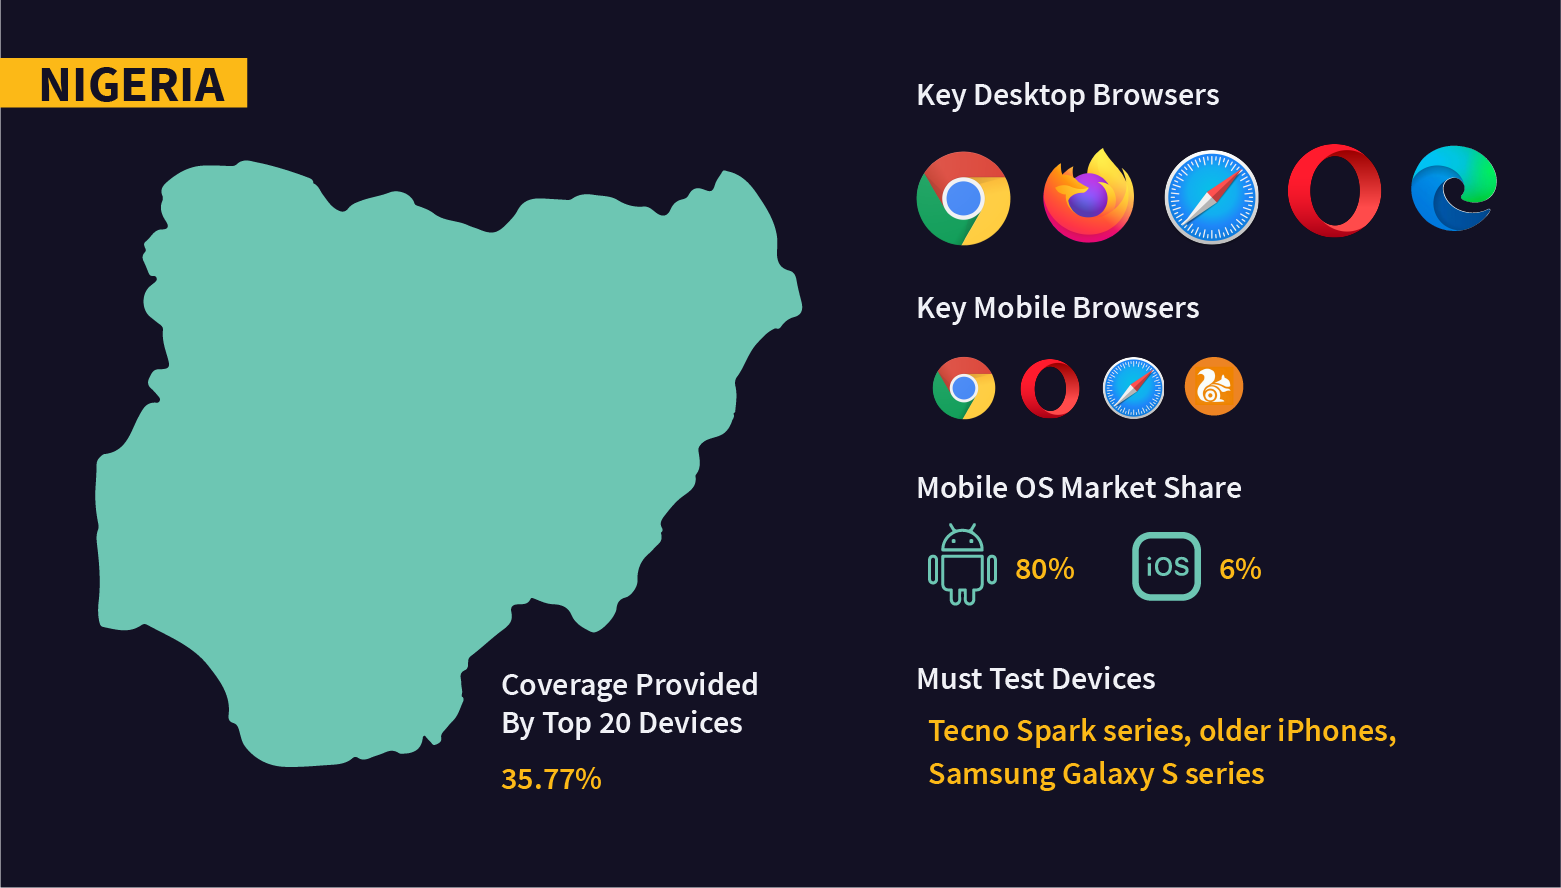 Fragmentation in OS, browsers, and devices in Nigeria